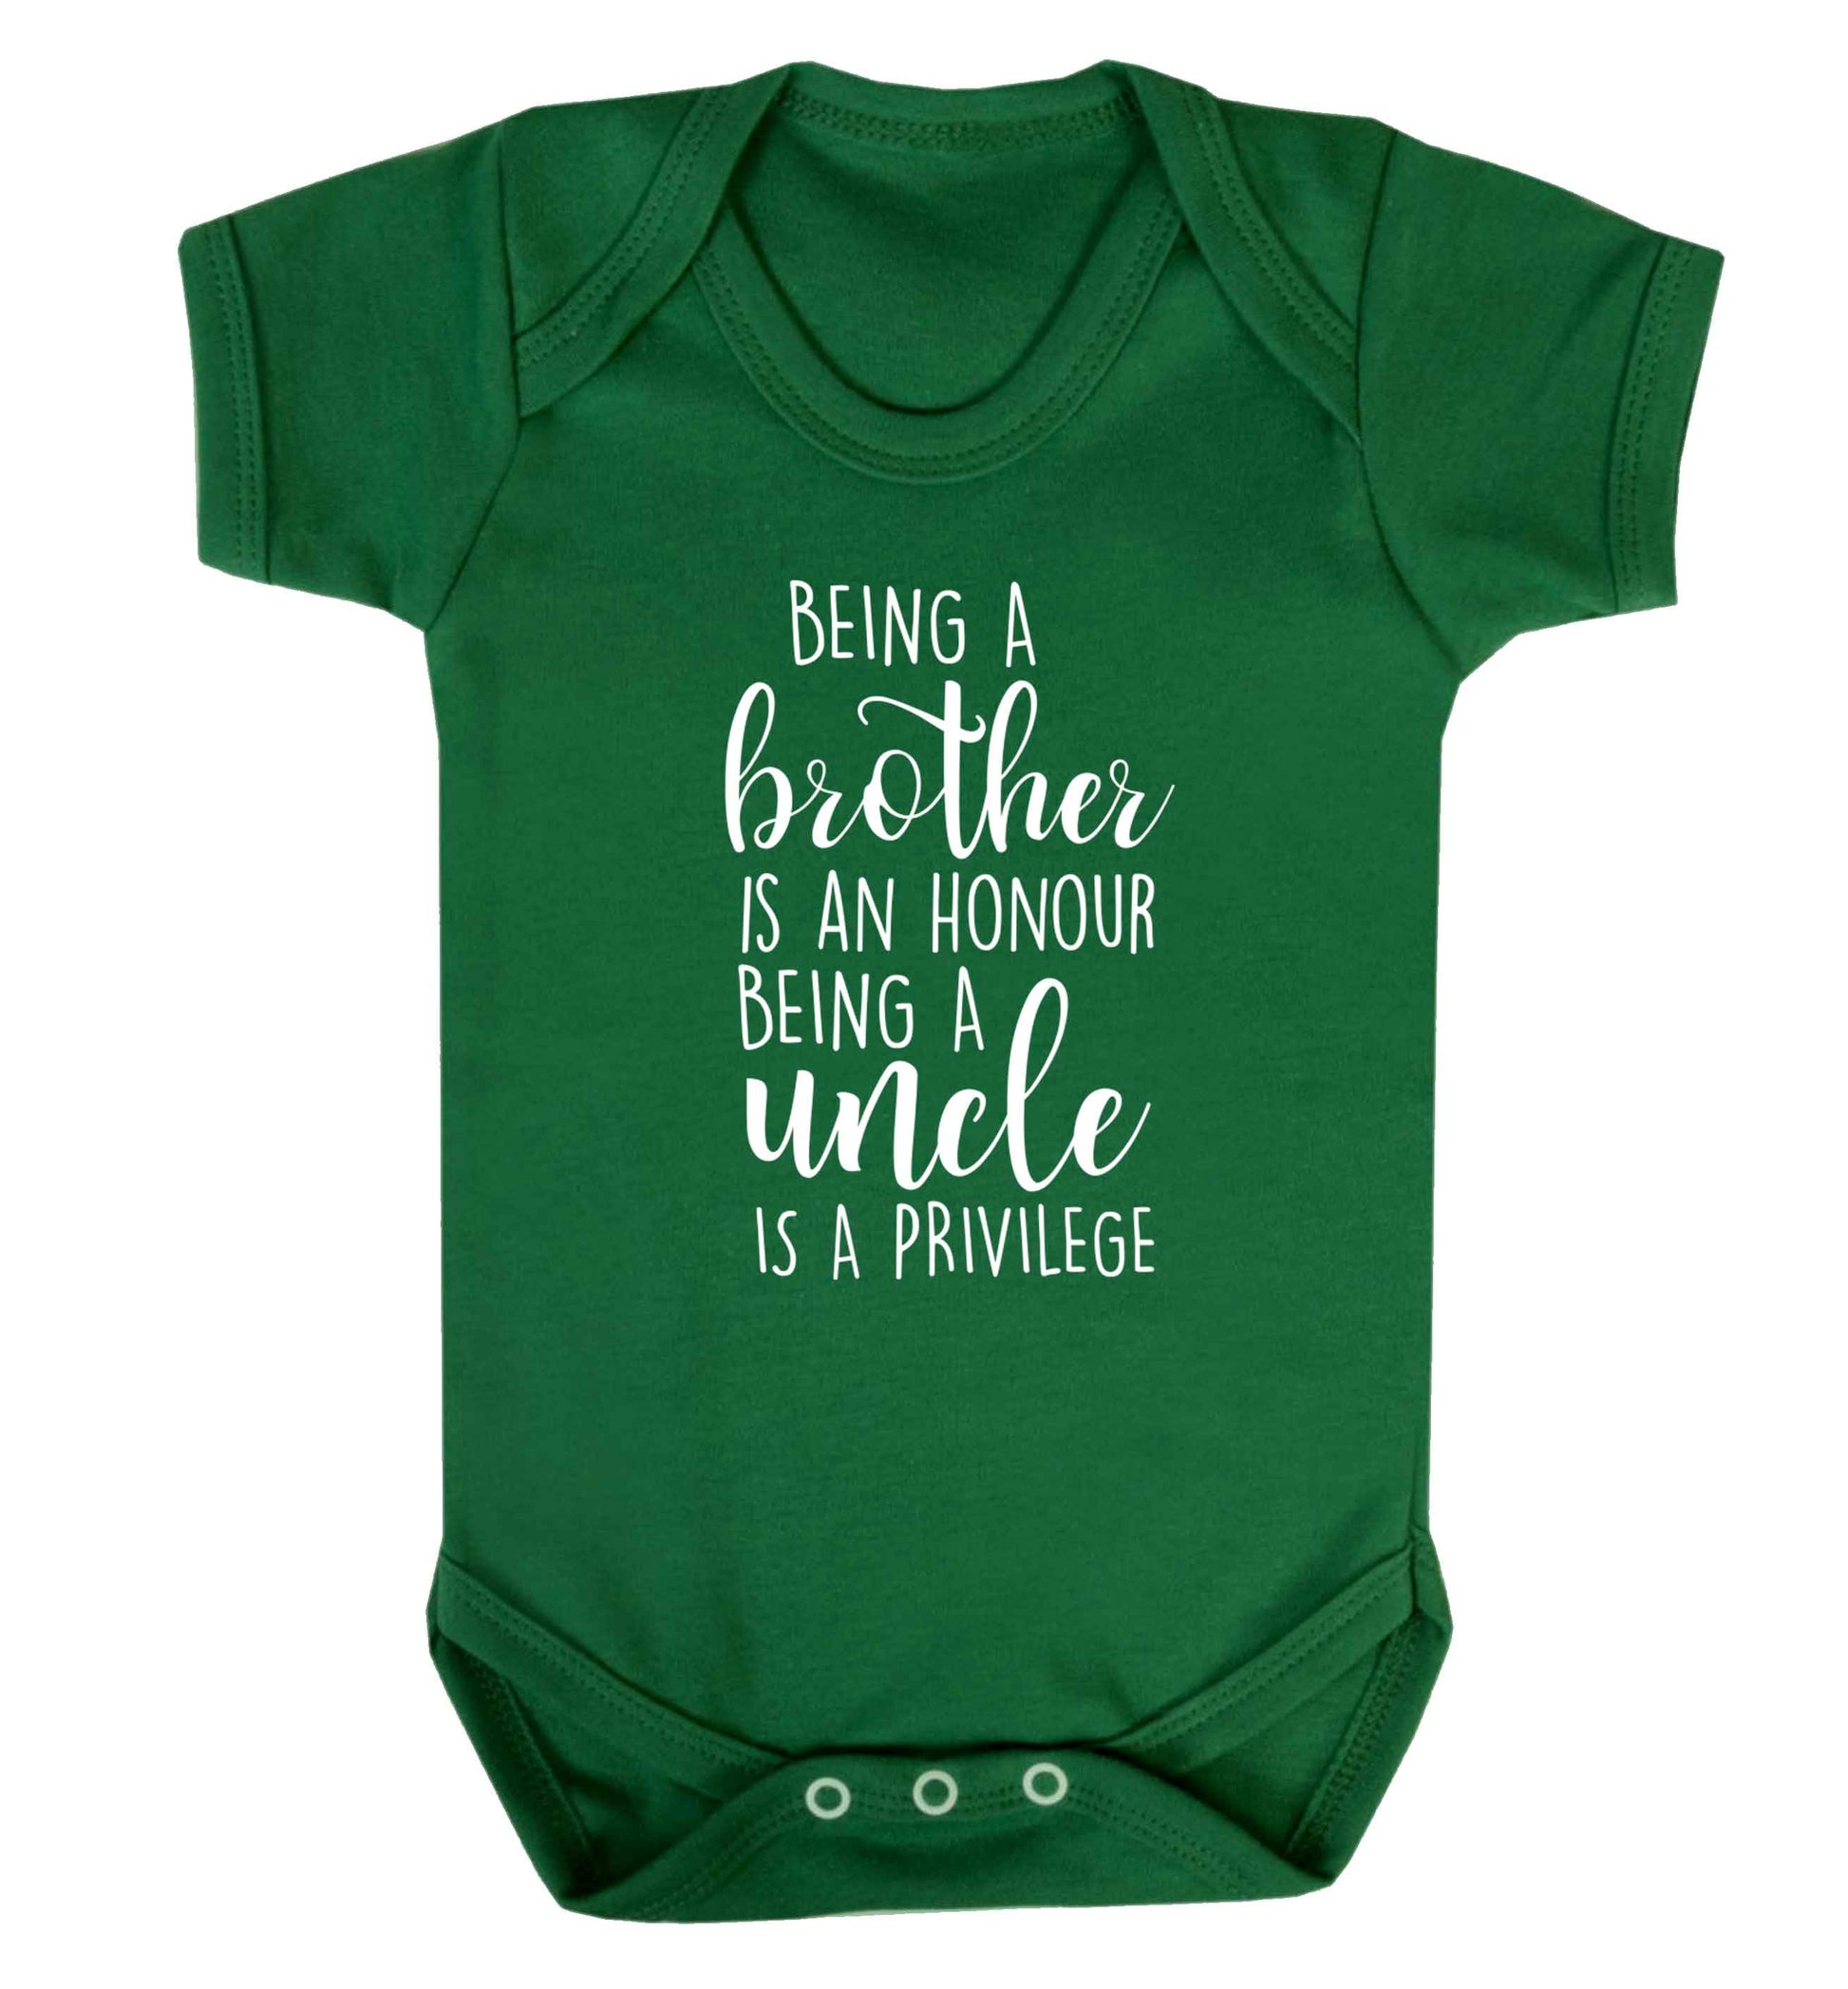 Being a brother is an honour being an uncle is a privilege Baby Vest green 18-24 months